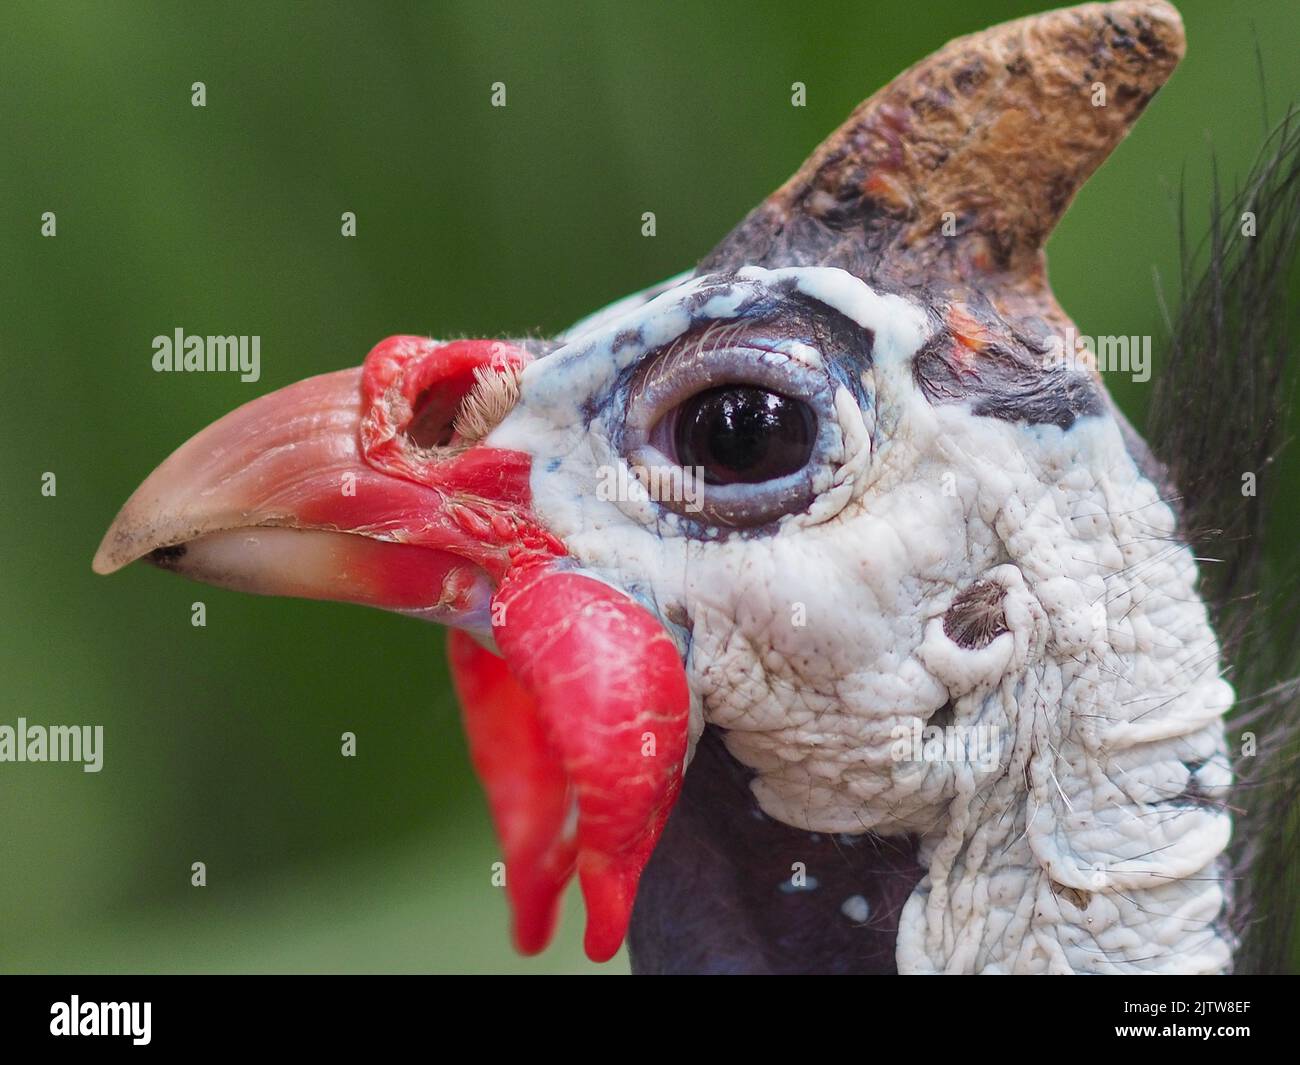 A closeup portrait of a sensational curious Helmeted Guineafowl in exceptional beauty. Stock Photo